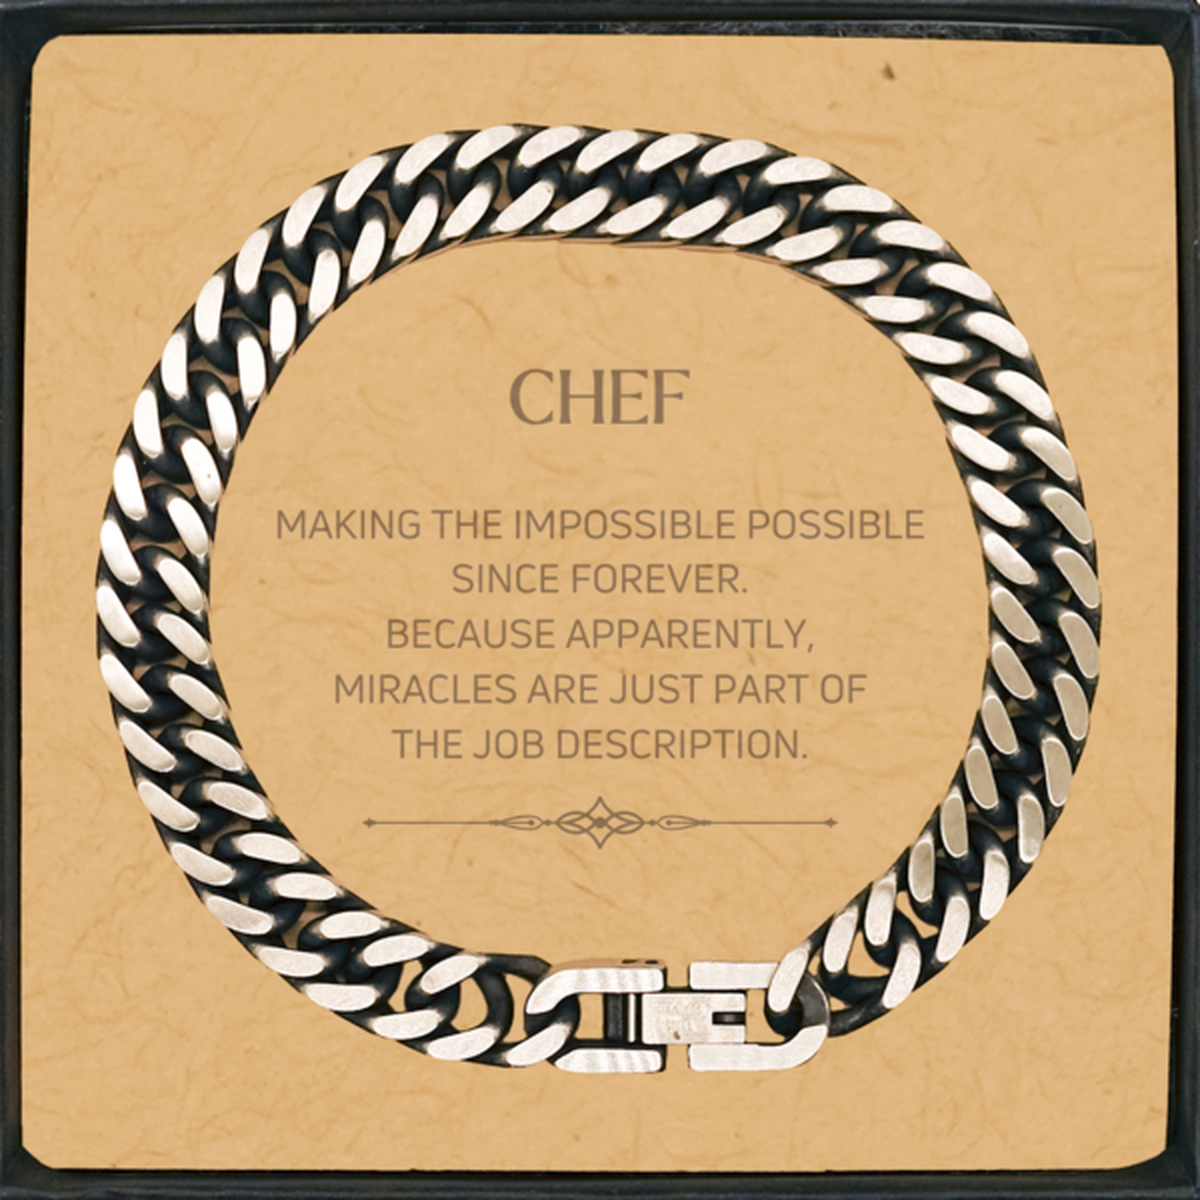 Funny Chef Gifts, Miracles are just part of the job description, Inspirational Birthday Cuban Link Chain Bracelet For Chef, Men, Women, Coworkers, Friends, Boss